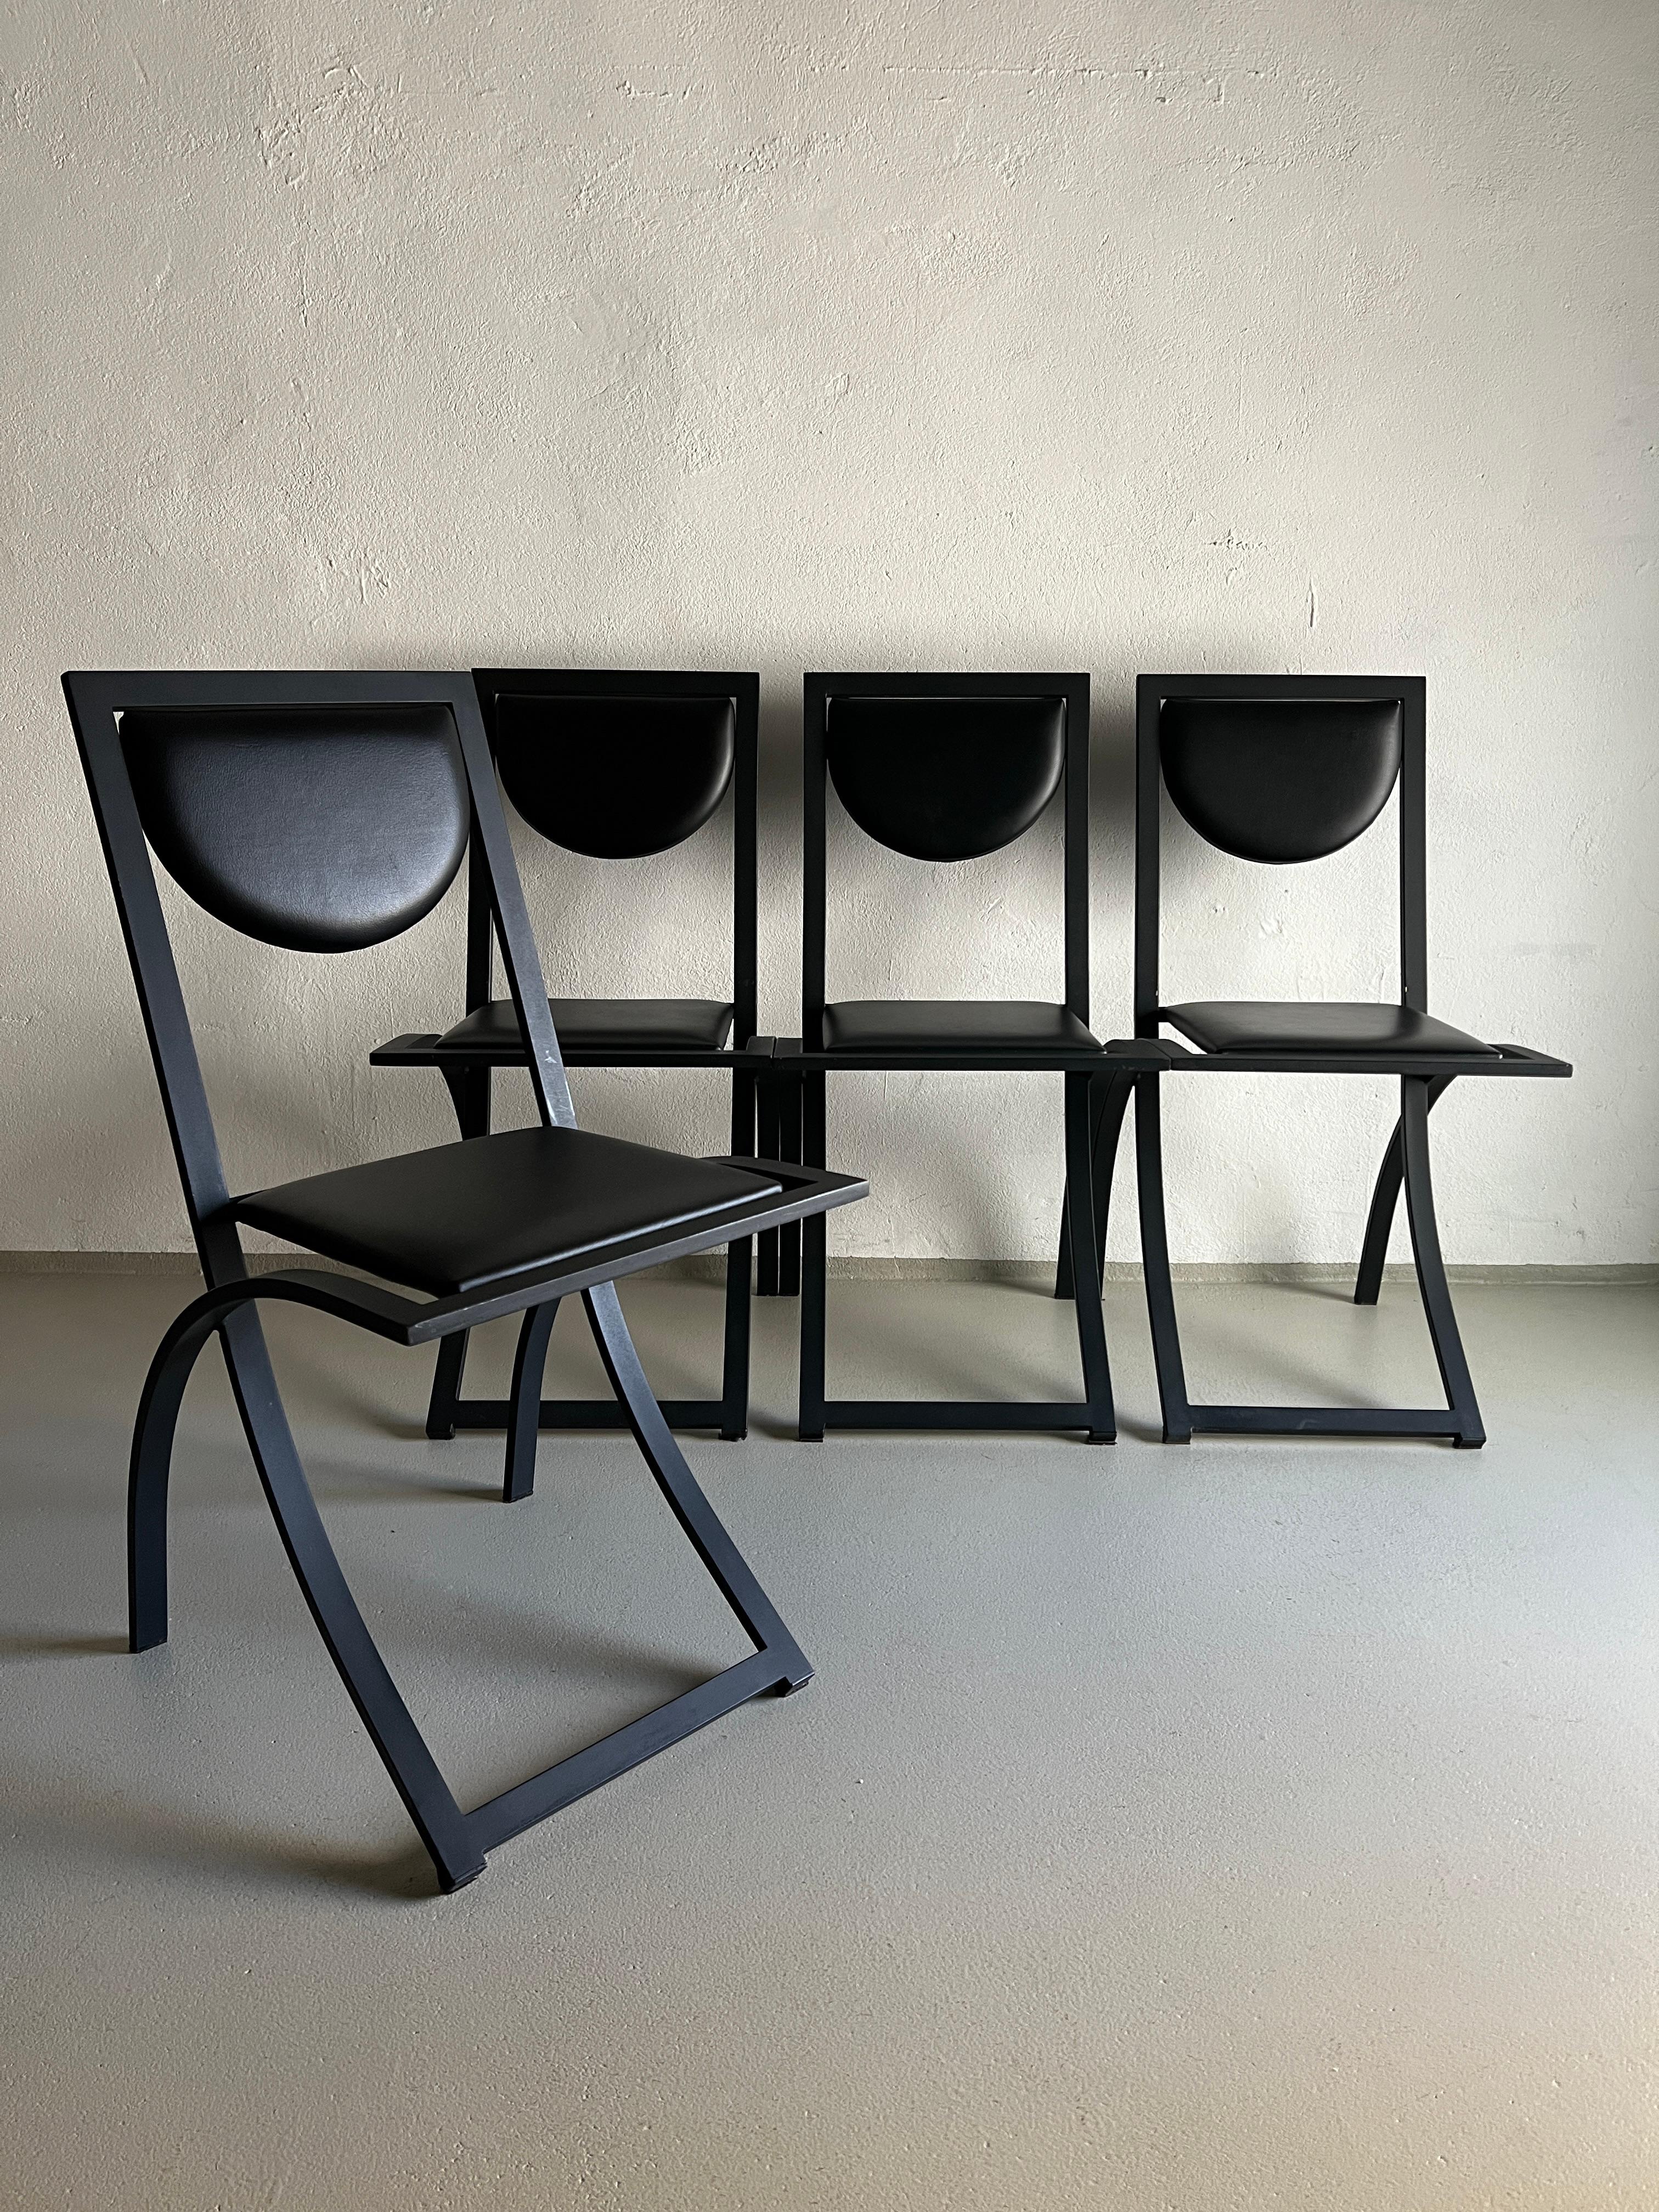 Set of 4 postmodern chairs designed by Karl Friedrich Förster for KFF Design in the 1980s. Black matt painted metal frame with faux leather upholstery.

Additional information:
Country of manufacture: Germany
Design period: 1980s
Dimensions: 43.5 W 